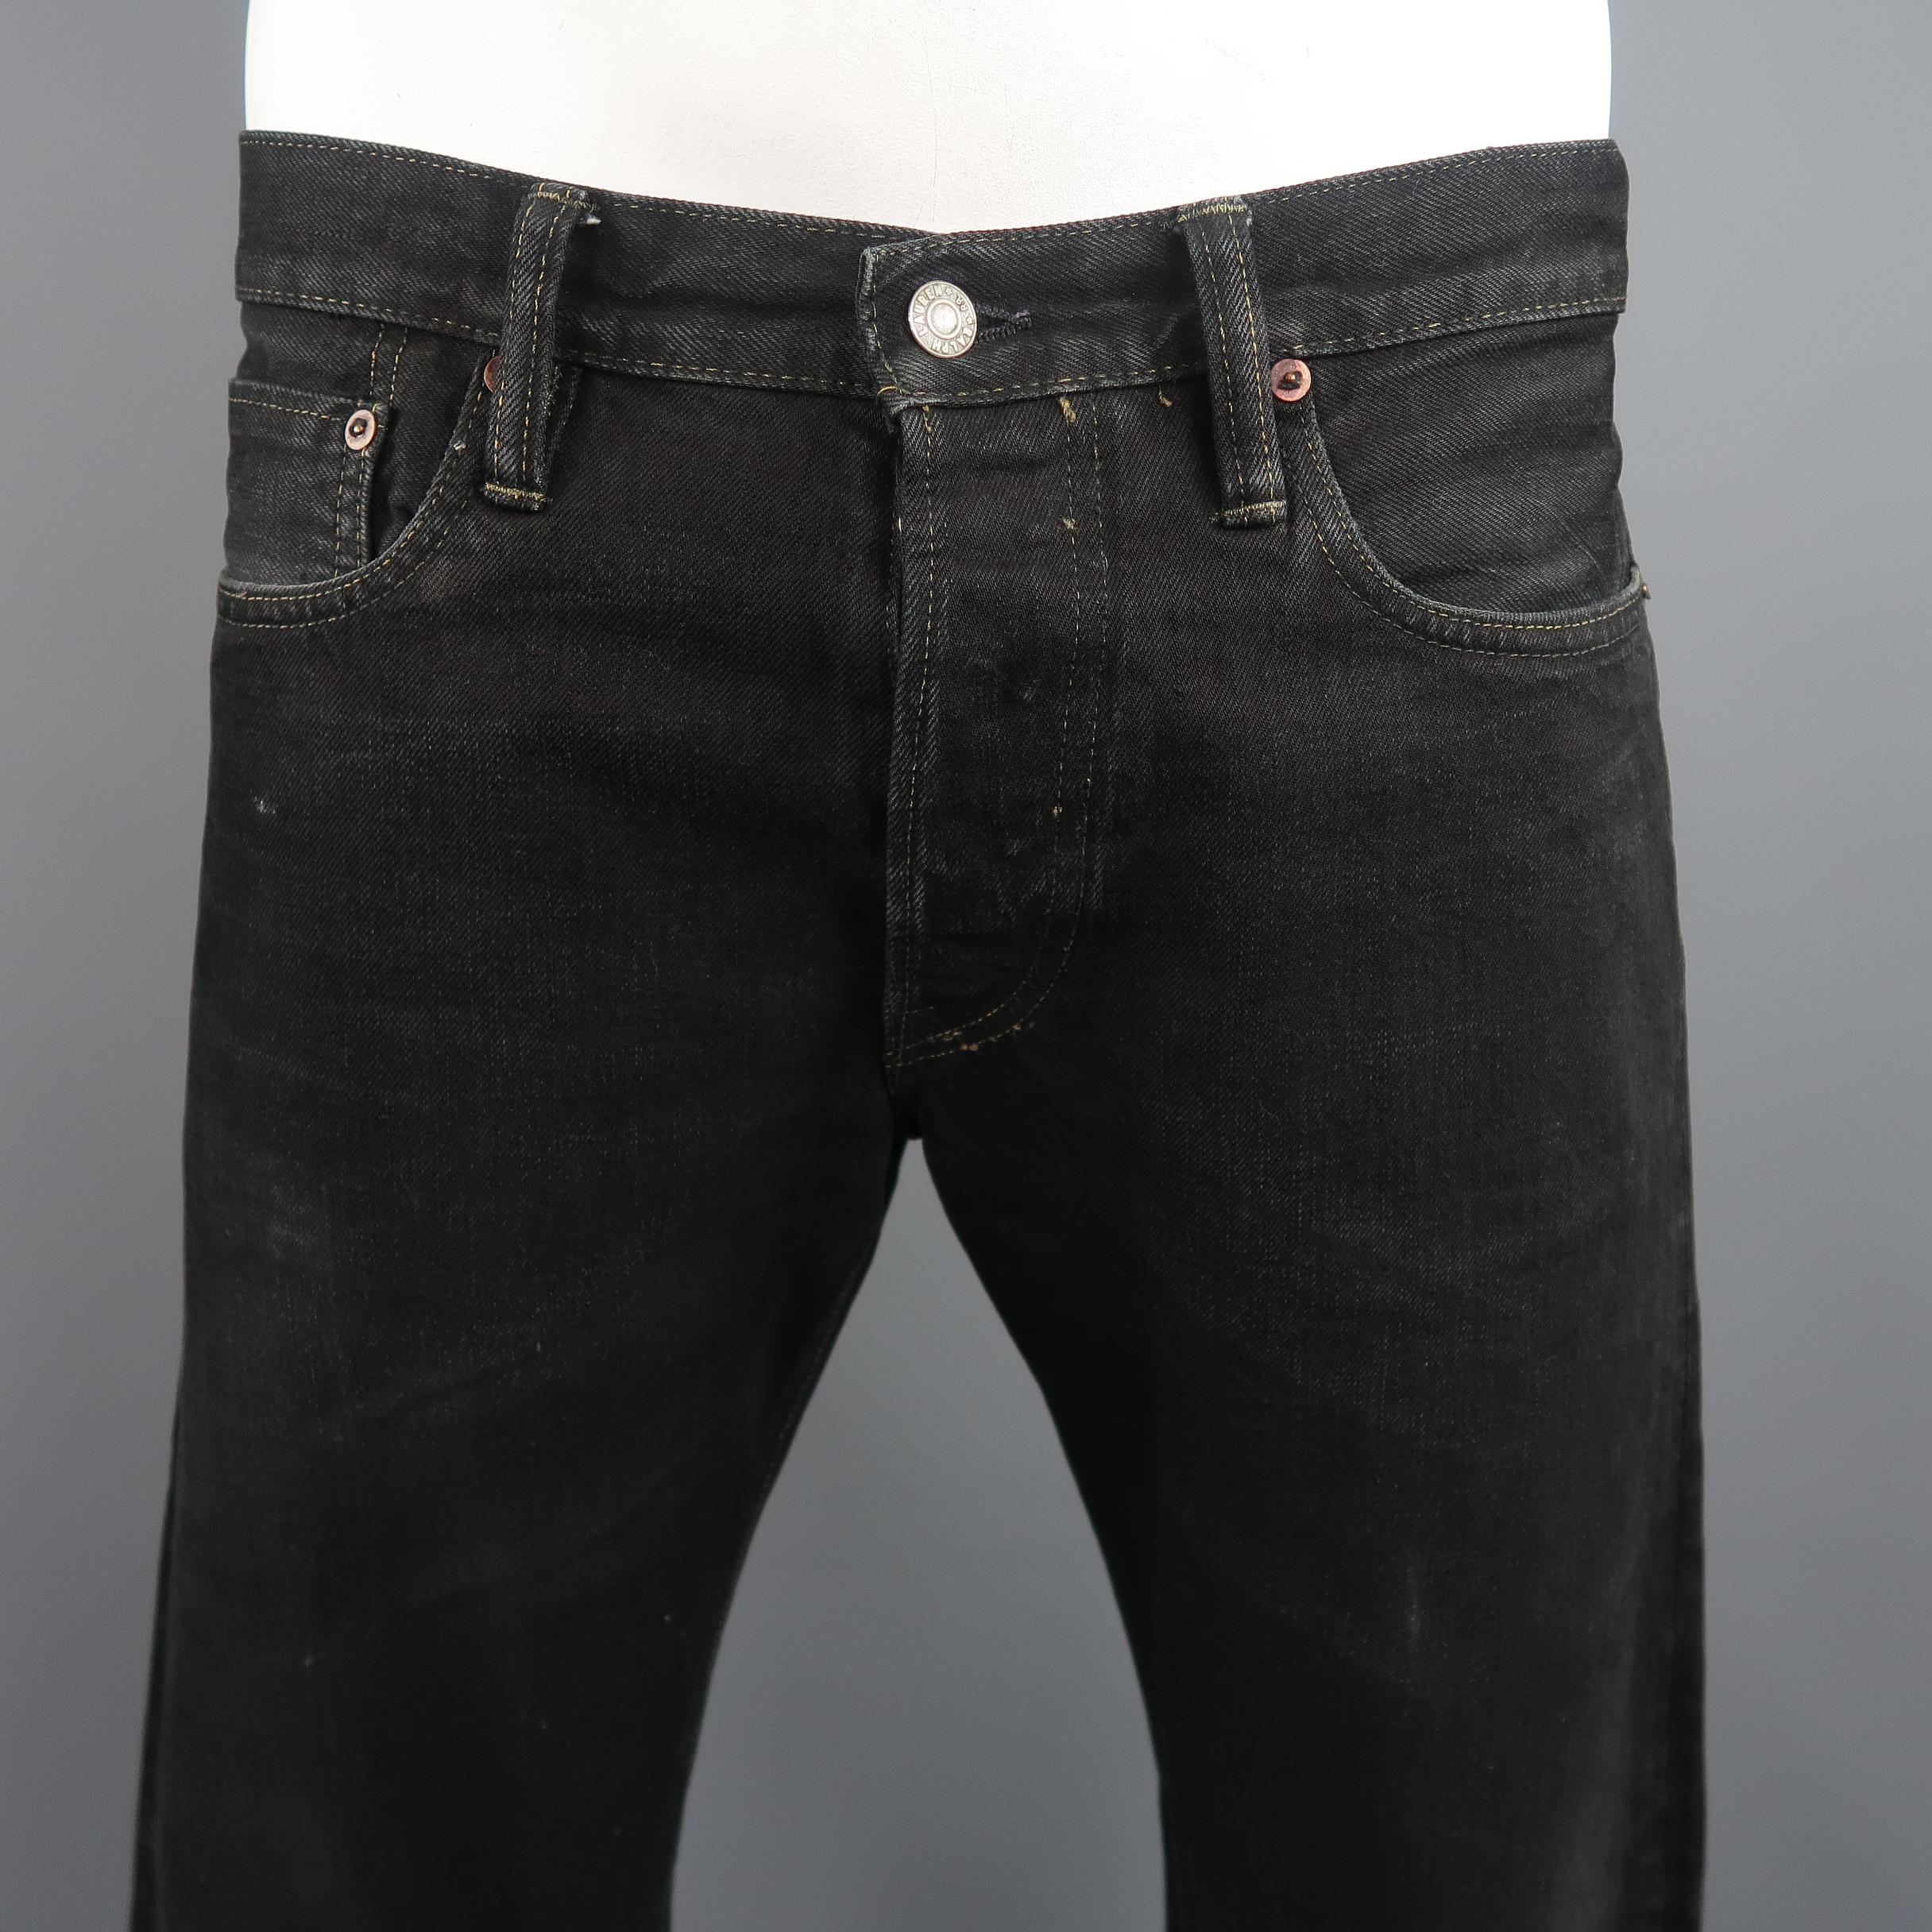 RRL by Ralph Lauren jeans come in washed black selvage denim with a slim leg and distressing throughout. Made in USA.
 
Good Pre-Owned Condition.
Marked: (no size)
 
Measurements:
 
Waist: 36 in.
Rise: 10.5 in.
Inseam:  32 in.